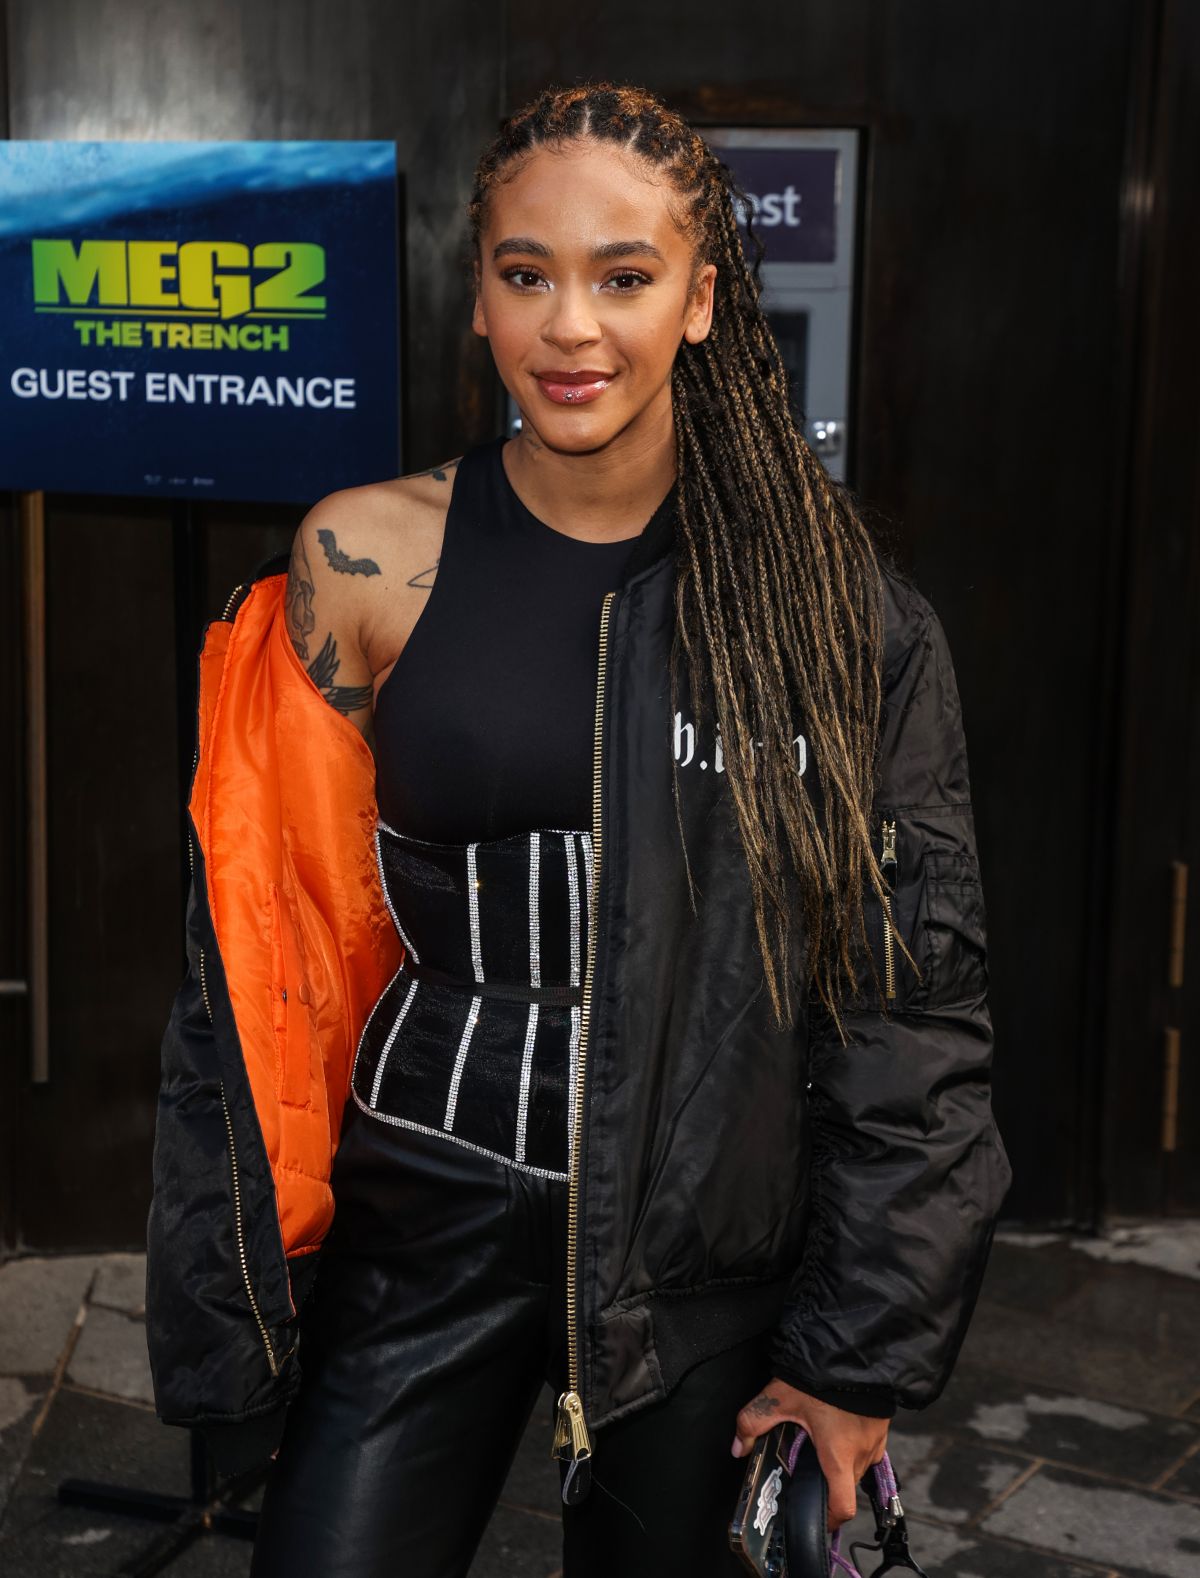 Yinka Bokinni Arrives at MEG 2: The Trench Special Fan Screening